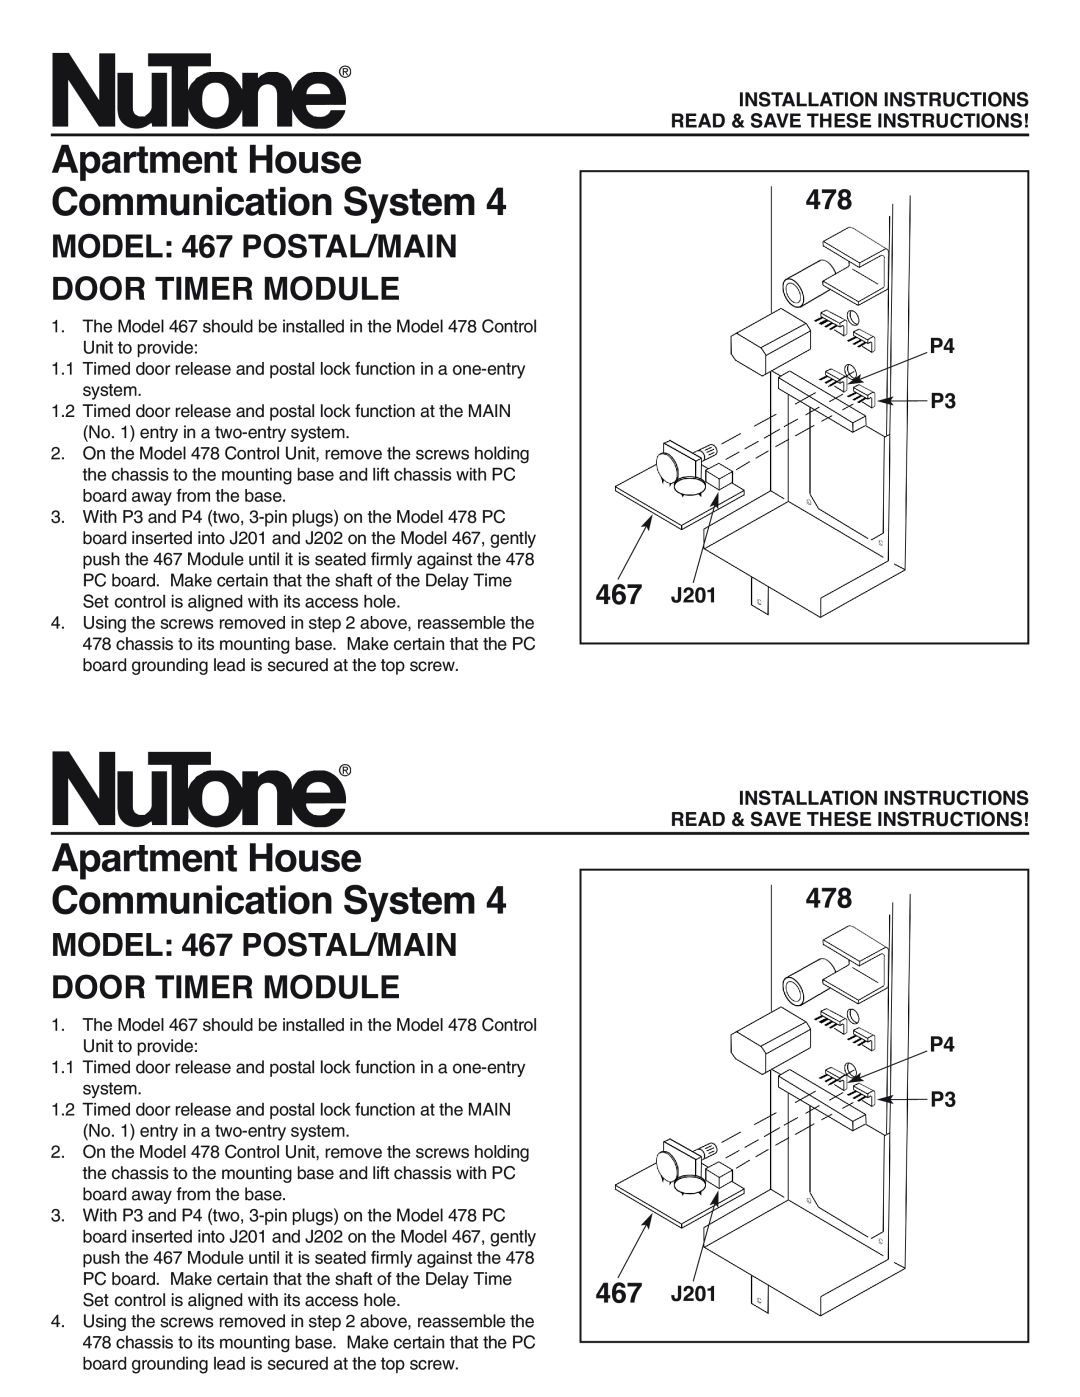 NuTone installation instructions Apartment House Communication System, MODEL 467 POSTAL/MAIN DOOR TIMER MODULE, P4 P3 